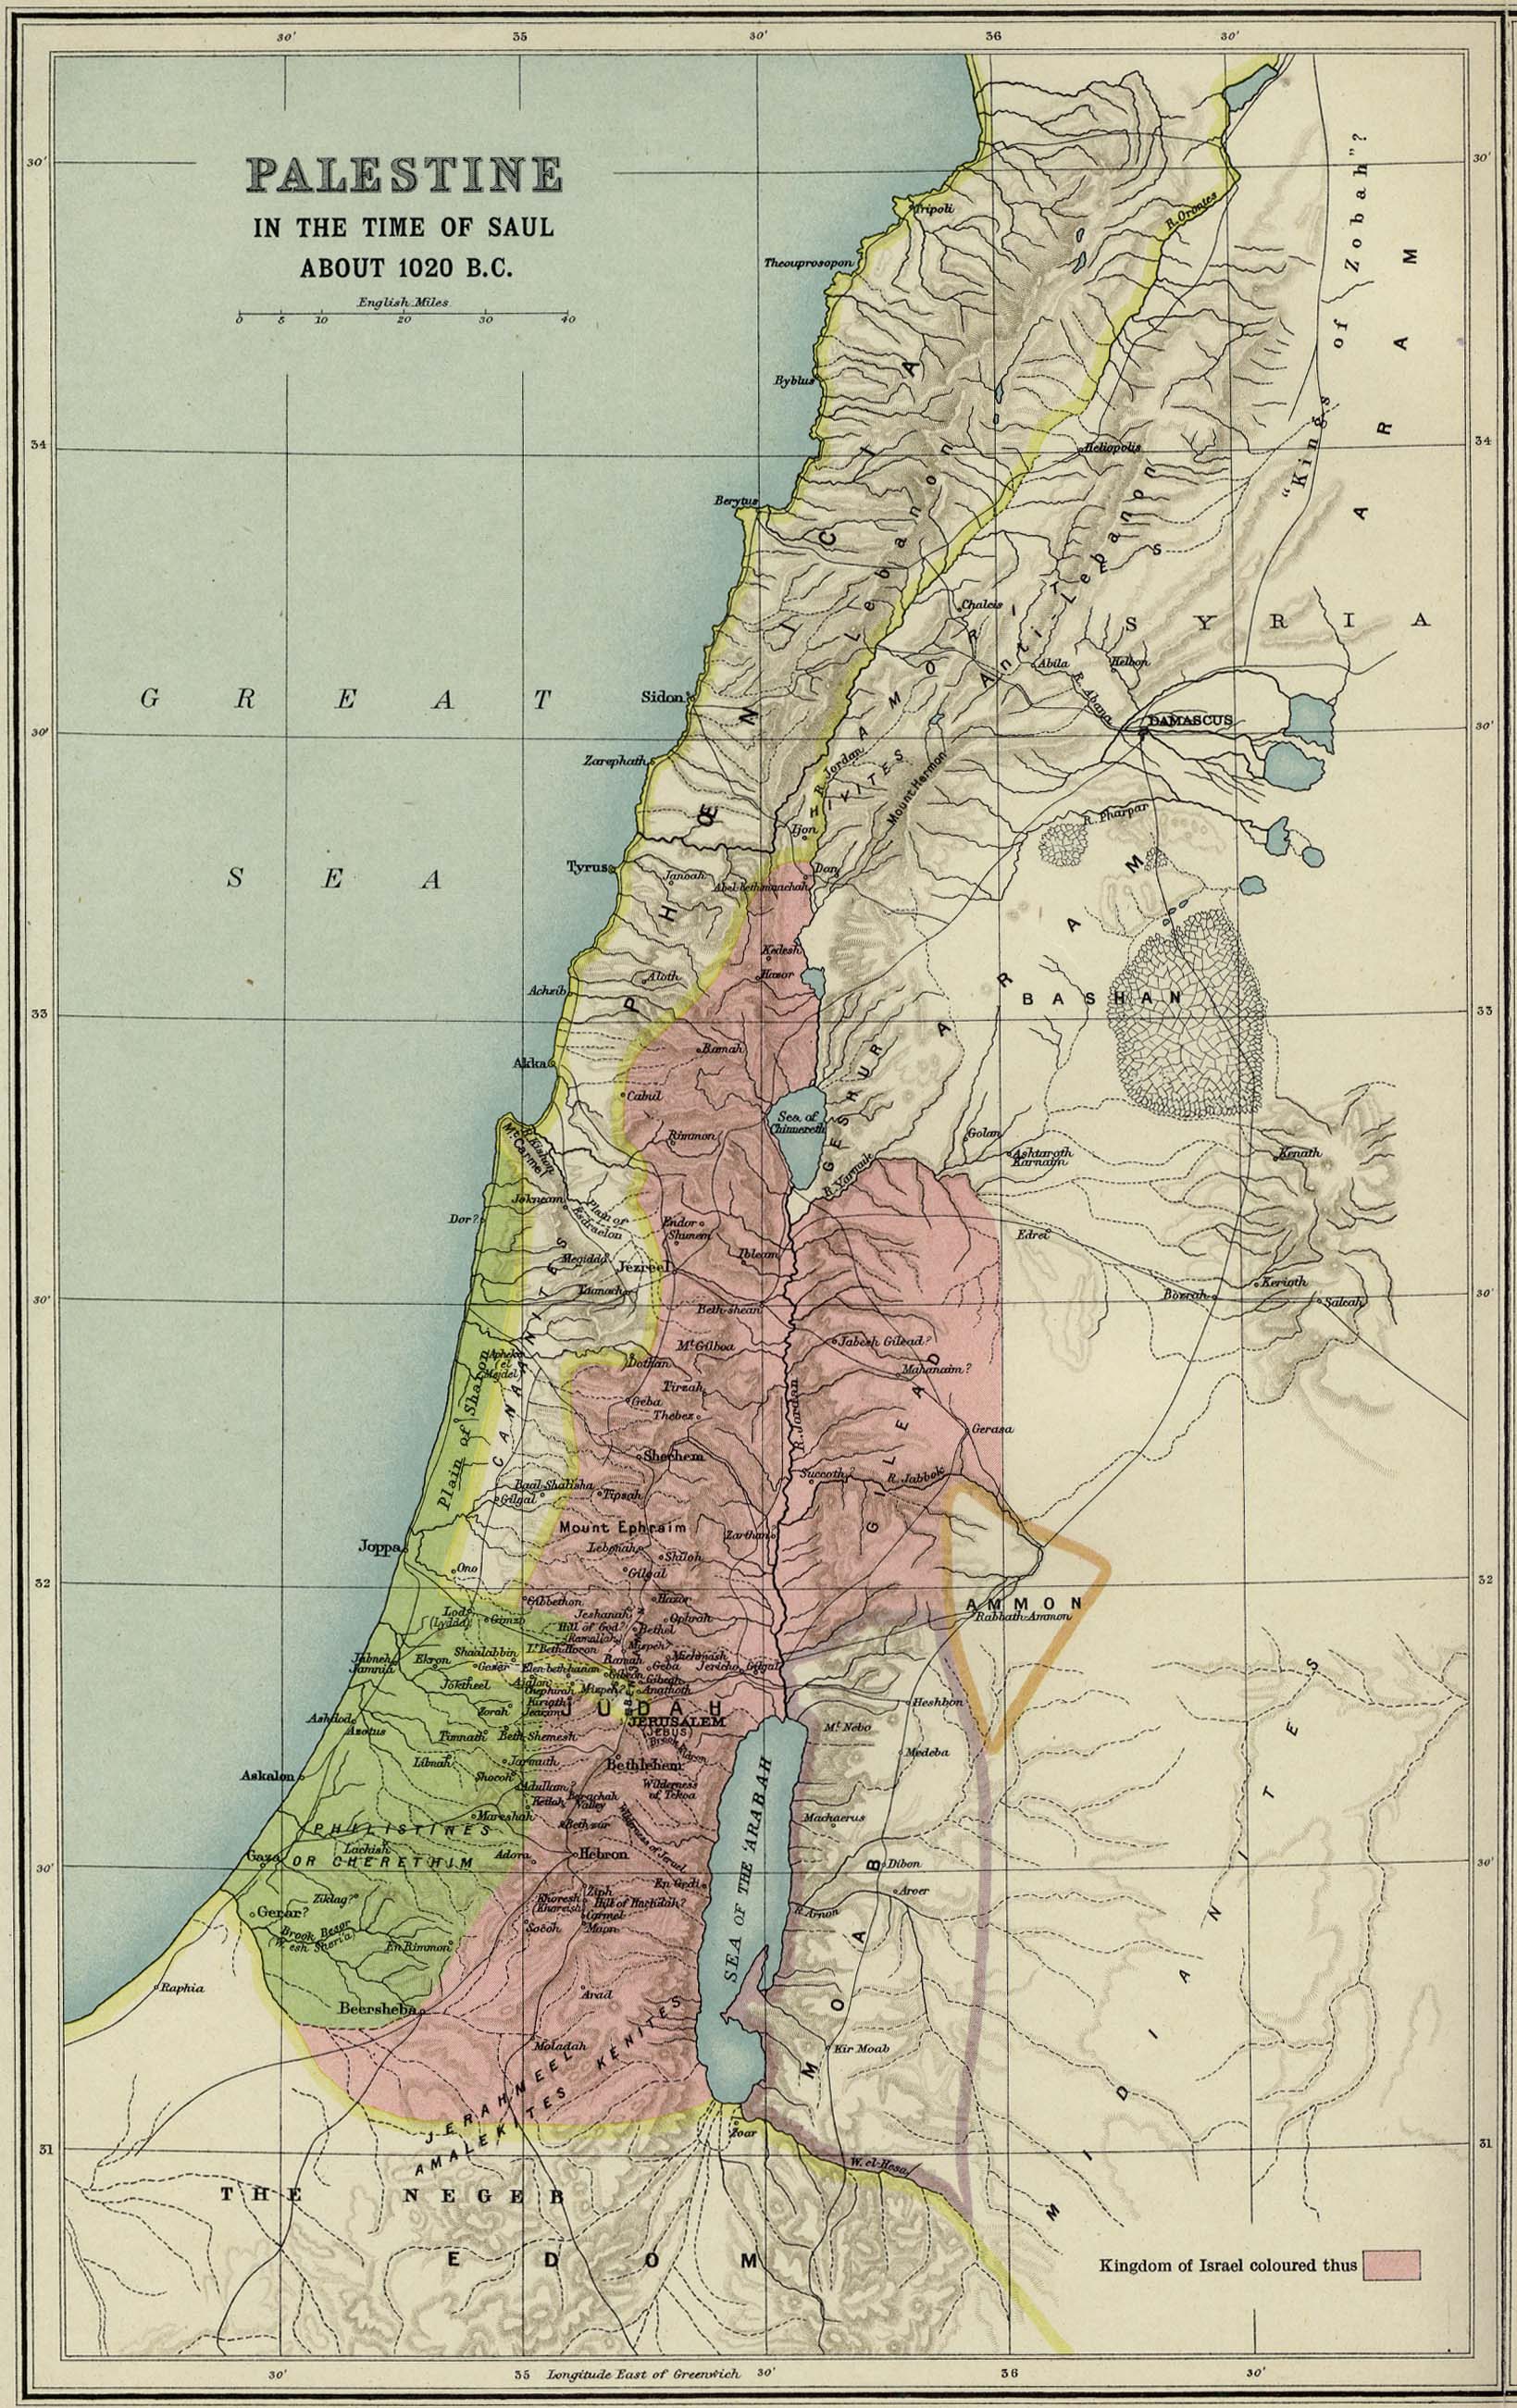 "Palestine in the time of Saul." From Atlas of the Historical Geography of the Holy Land. Smith, George Adam. London, 1915. 